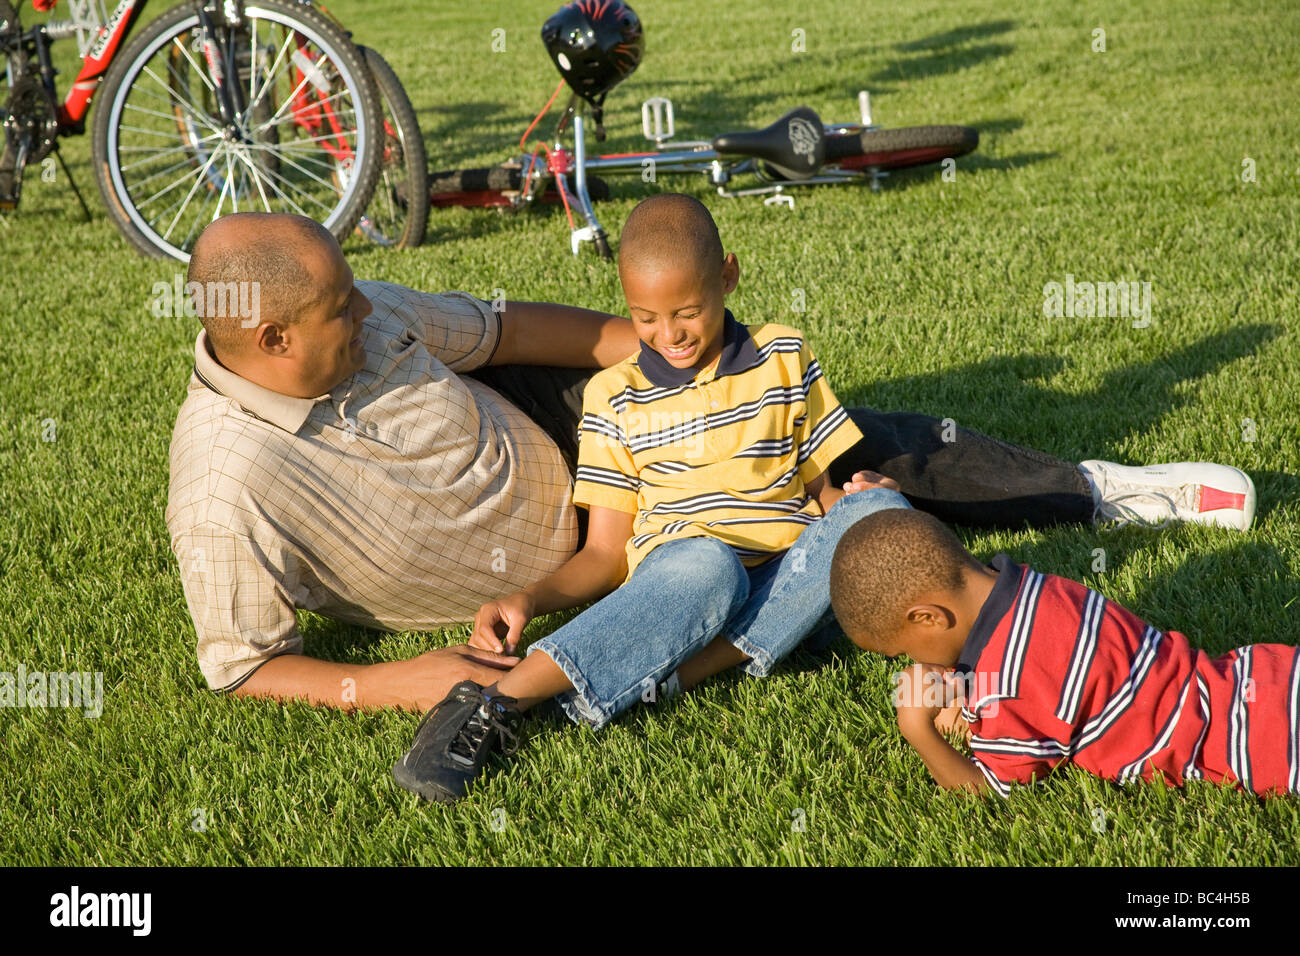 Dad boys young person people Father sons talking the talk with each other outside relaxing grass riding bicycles Conversation 5-9 years year old Stock Photo